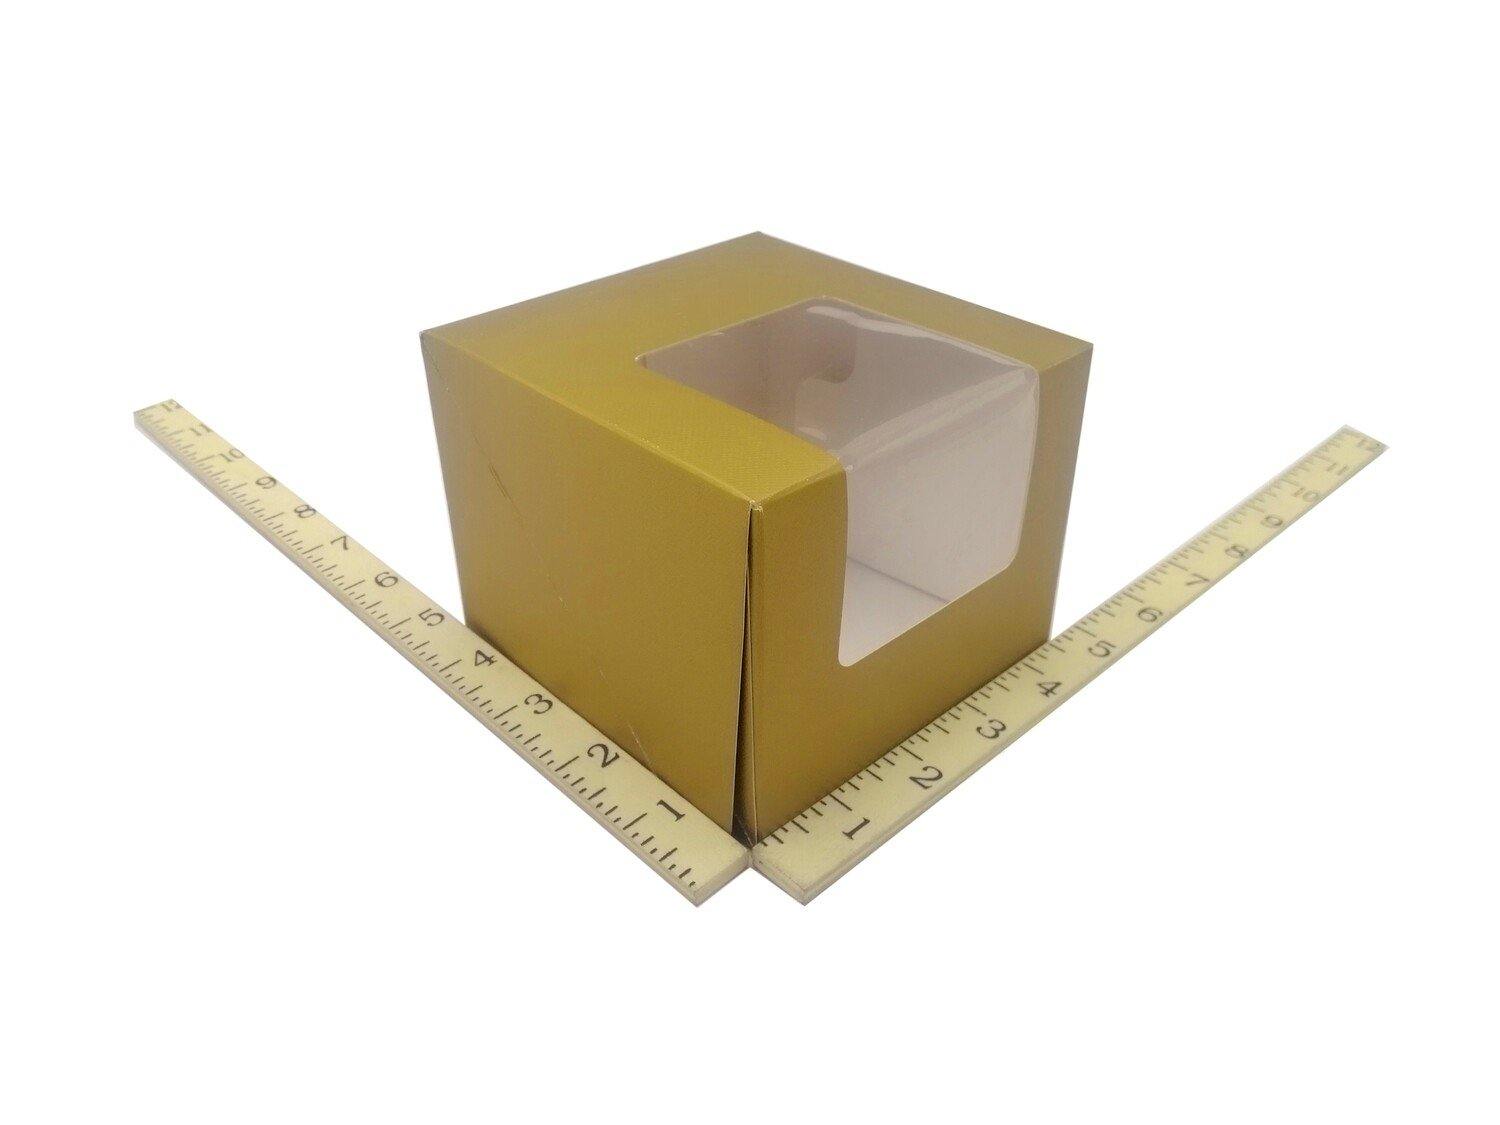 4 1/2 X 4 1/2 X 3 1/2 ALL GOLD 20'S (PFBOX) - Kitchen Convenience: Ingredients & Supplies Delivery